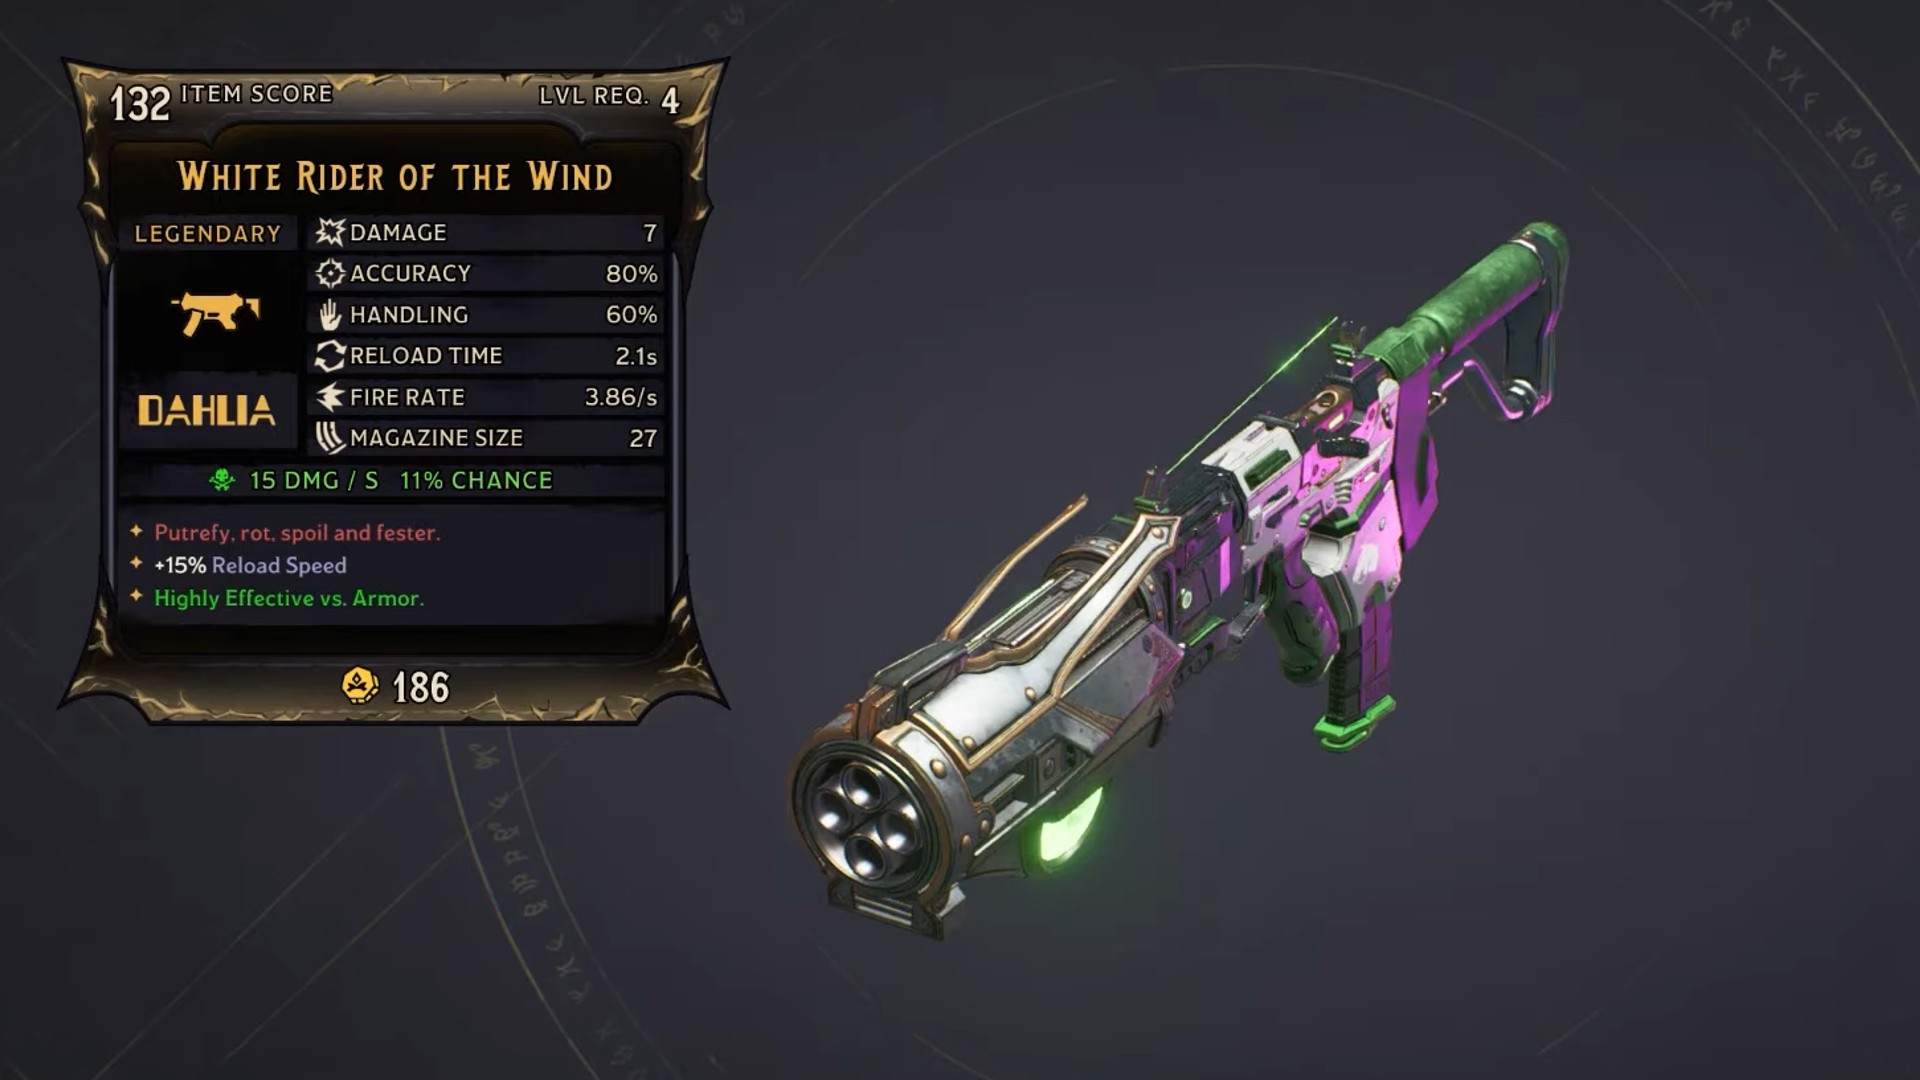 Tiny Tina's Wonderlands legendary weapons: the stats and model of the White Rider of the Wind SMG